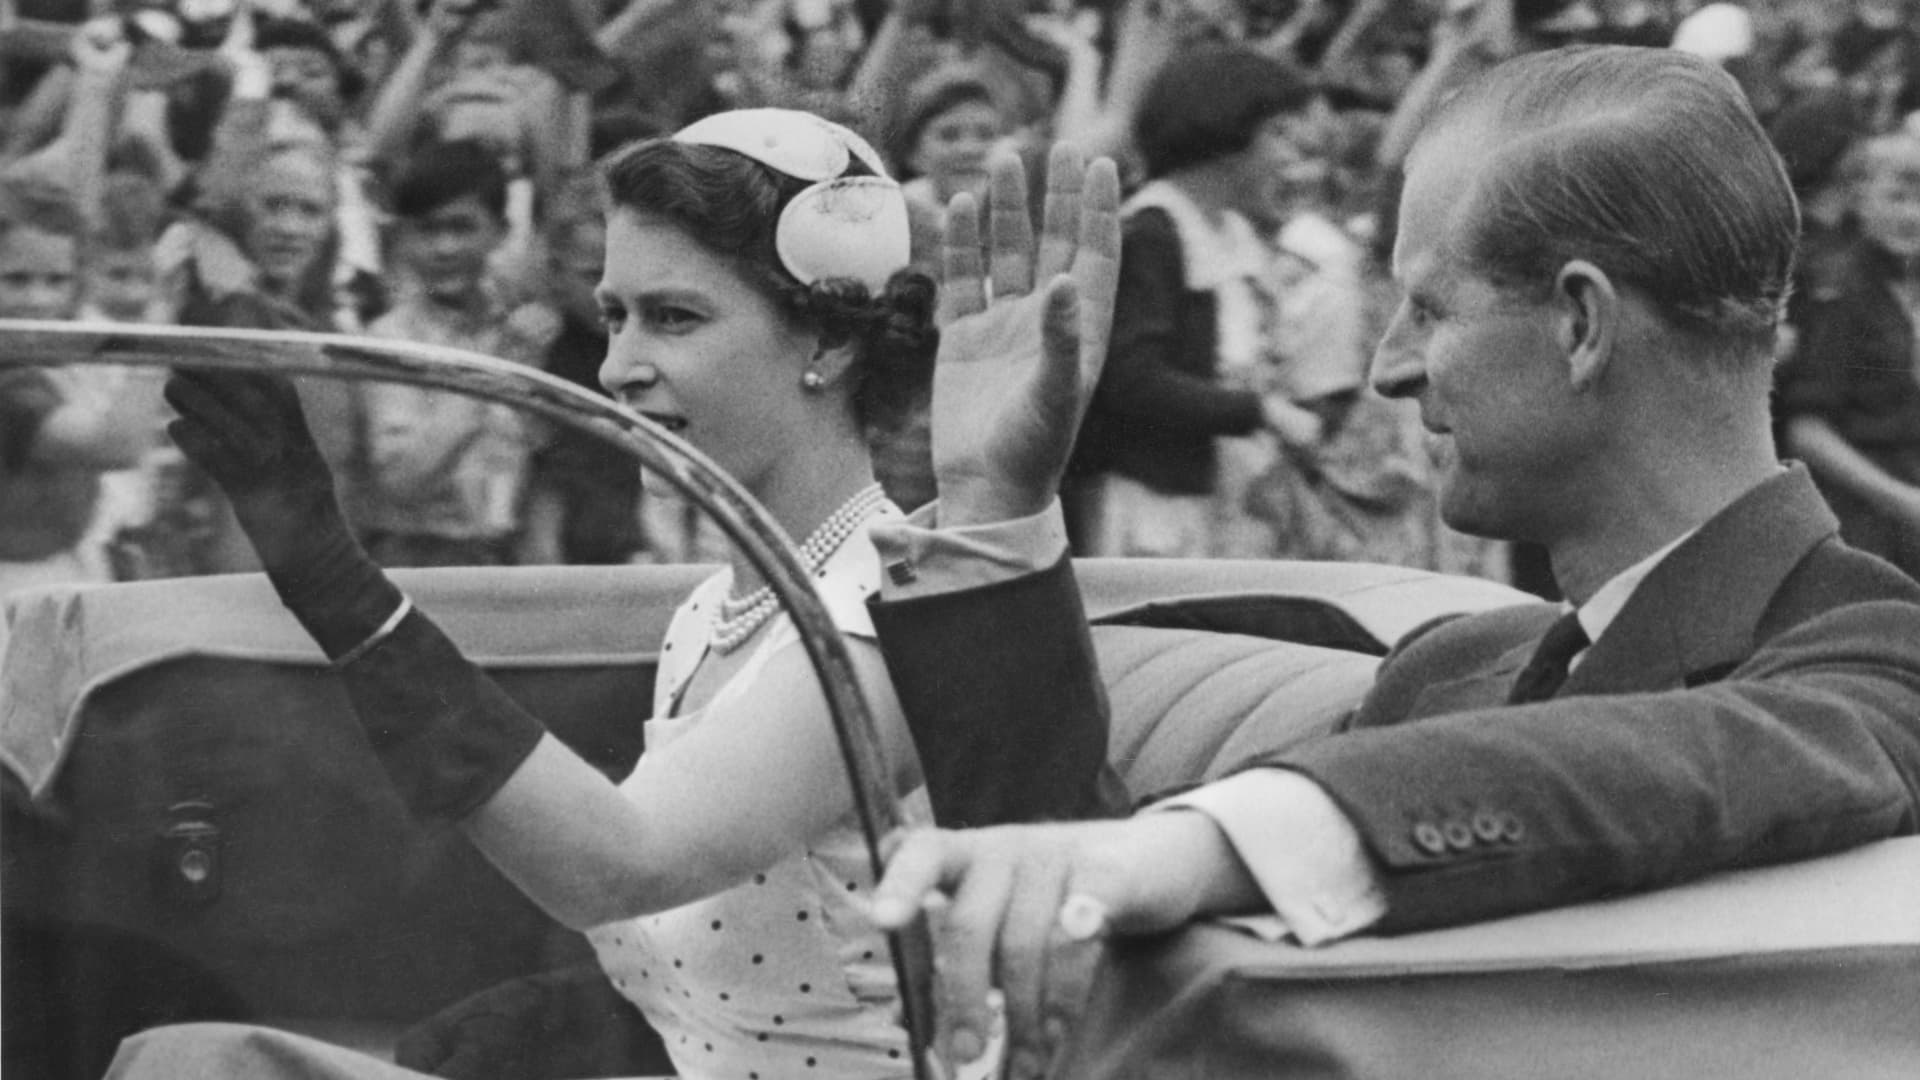 Queen Elizabeth II and Prince Philip returning to Government House after attending a youth rally in Auckland, New Zealand, during the coronation world tour, Dec. 24, 1953.